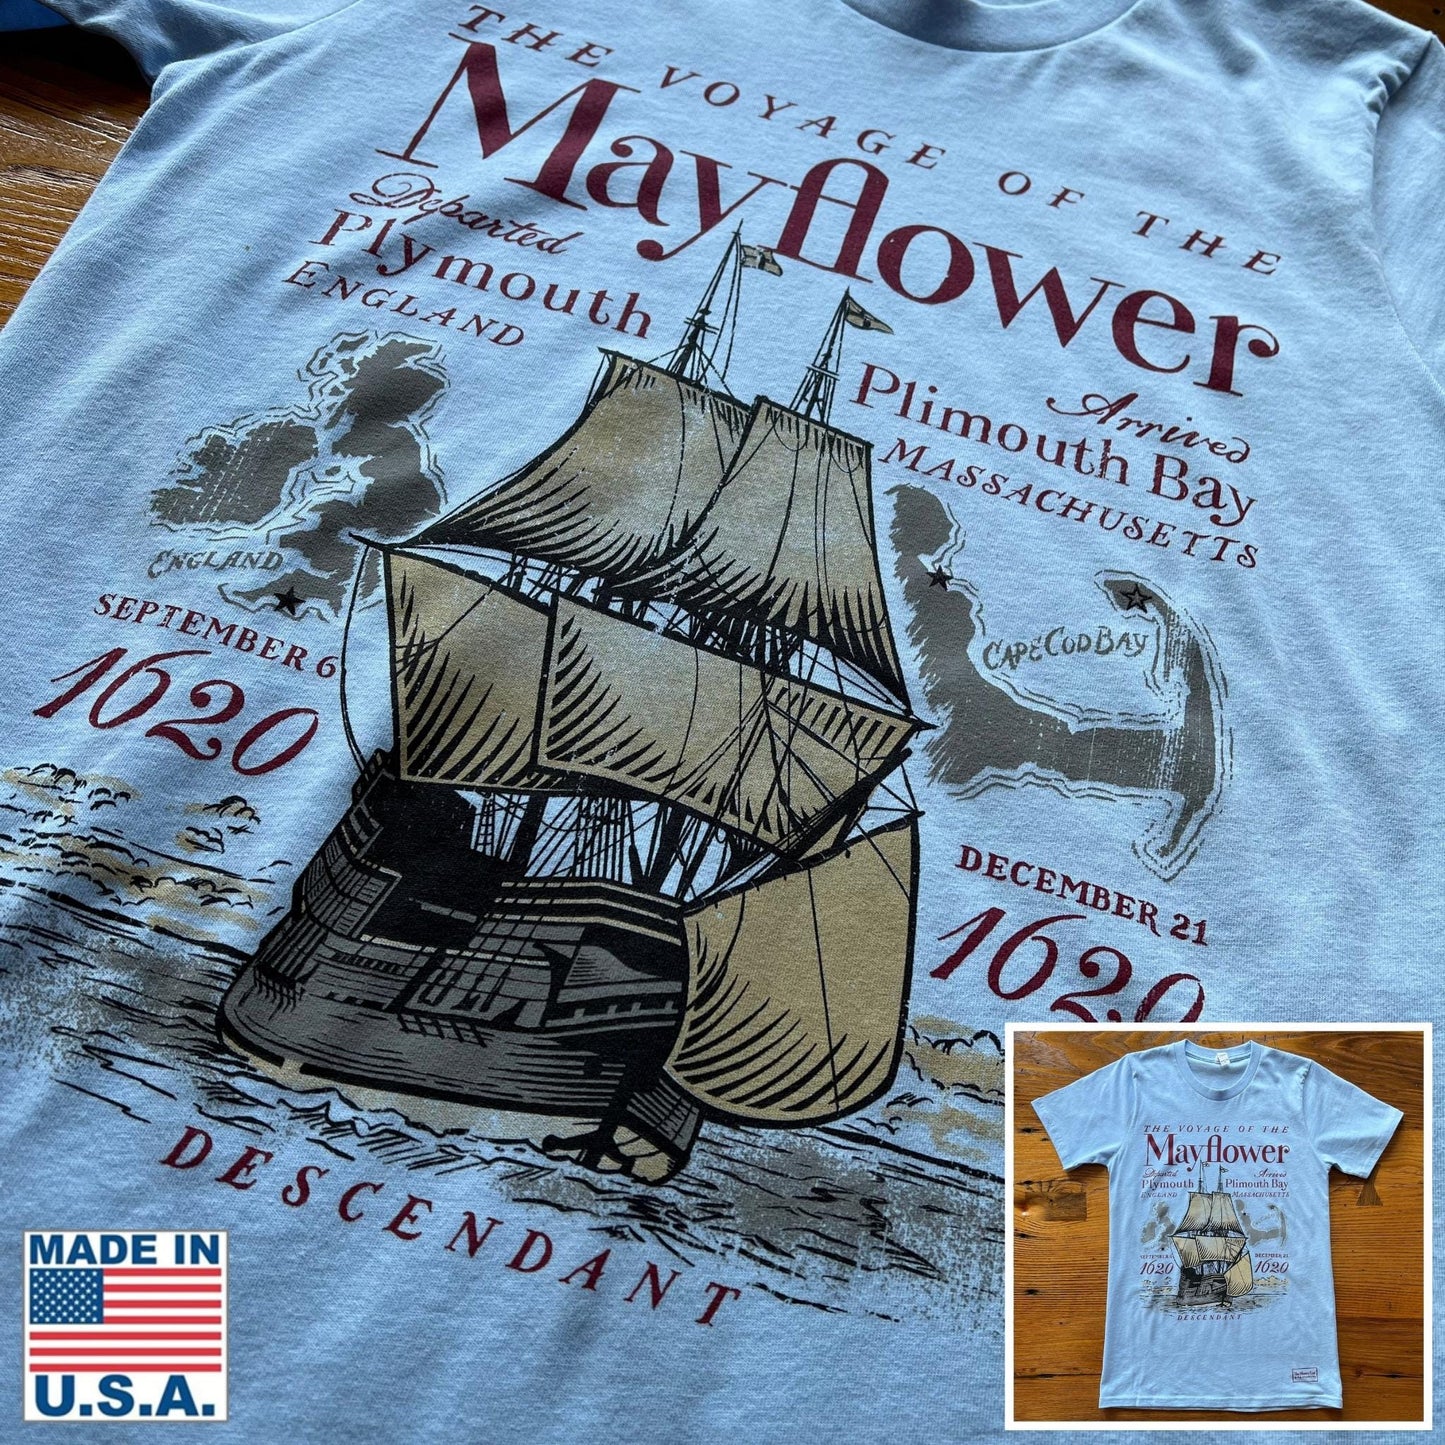 Light Blue - "The Voyage of the Mayflower" Shirt from the history list store